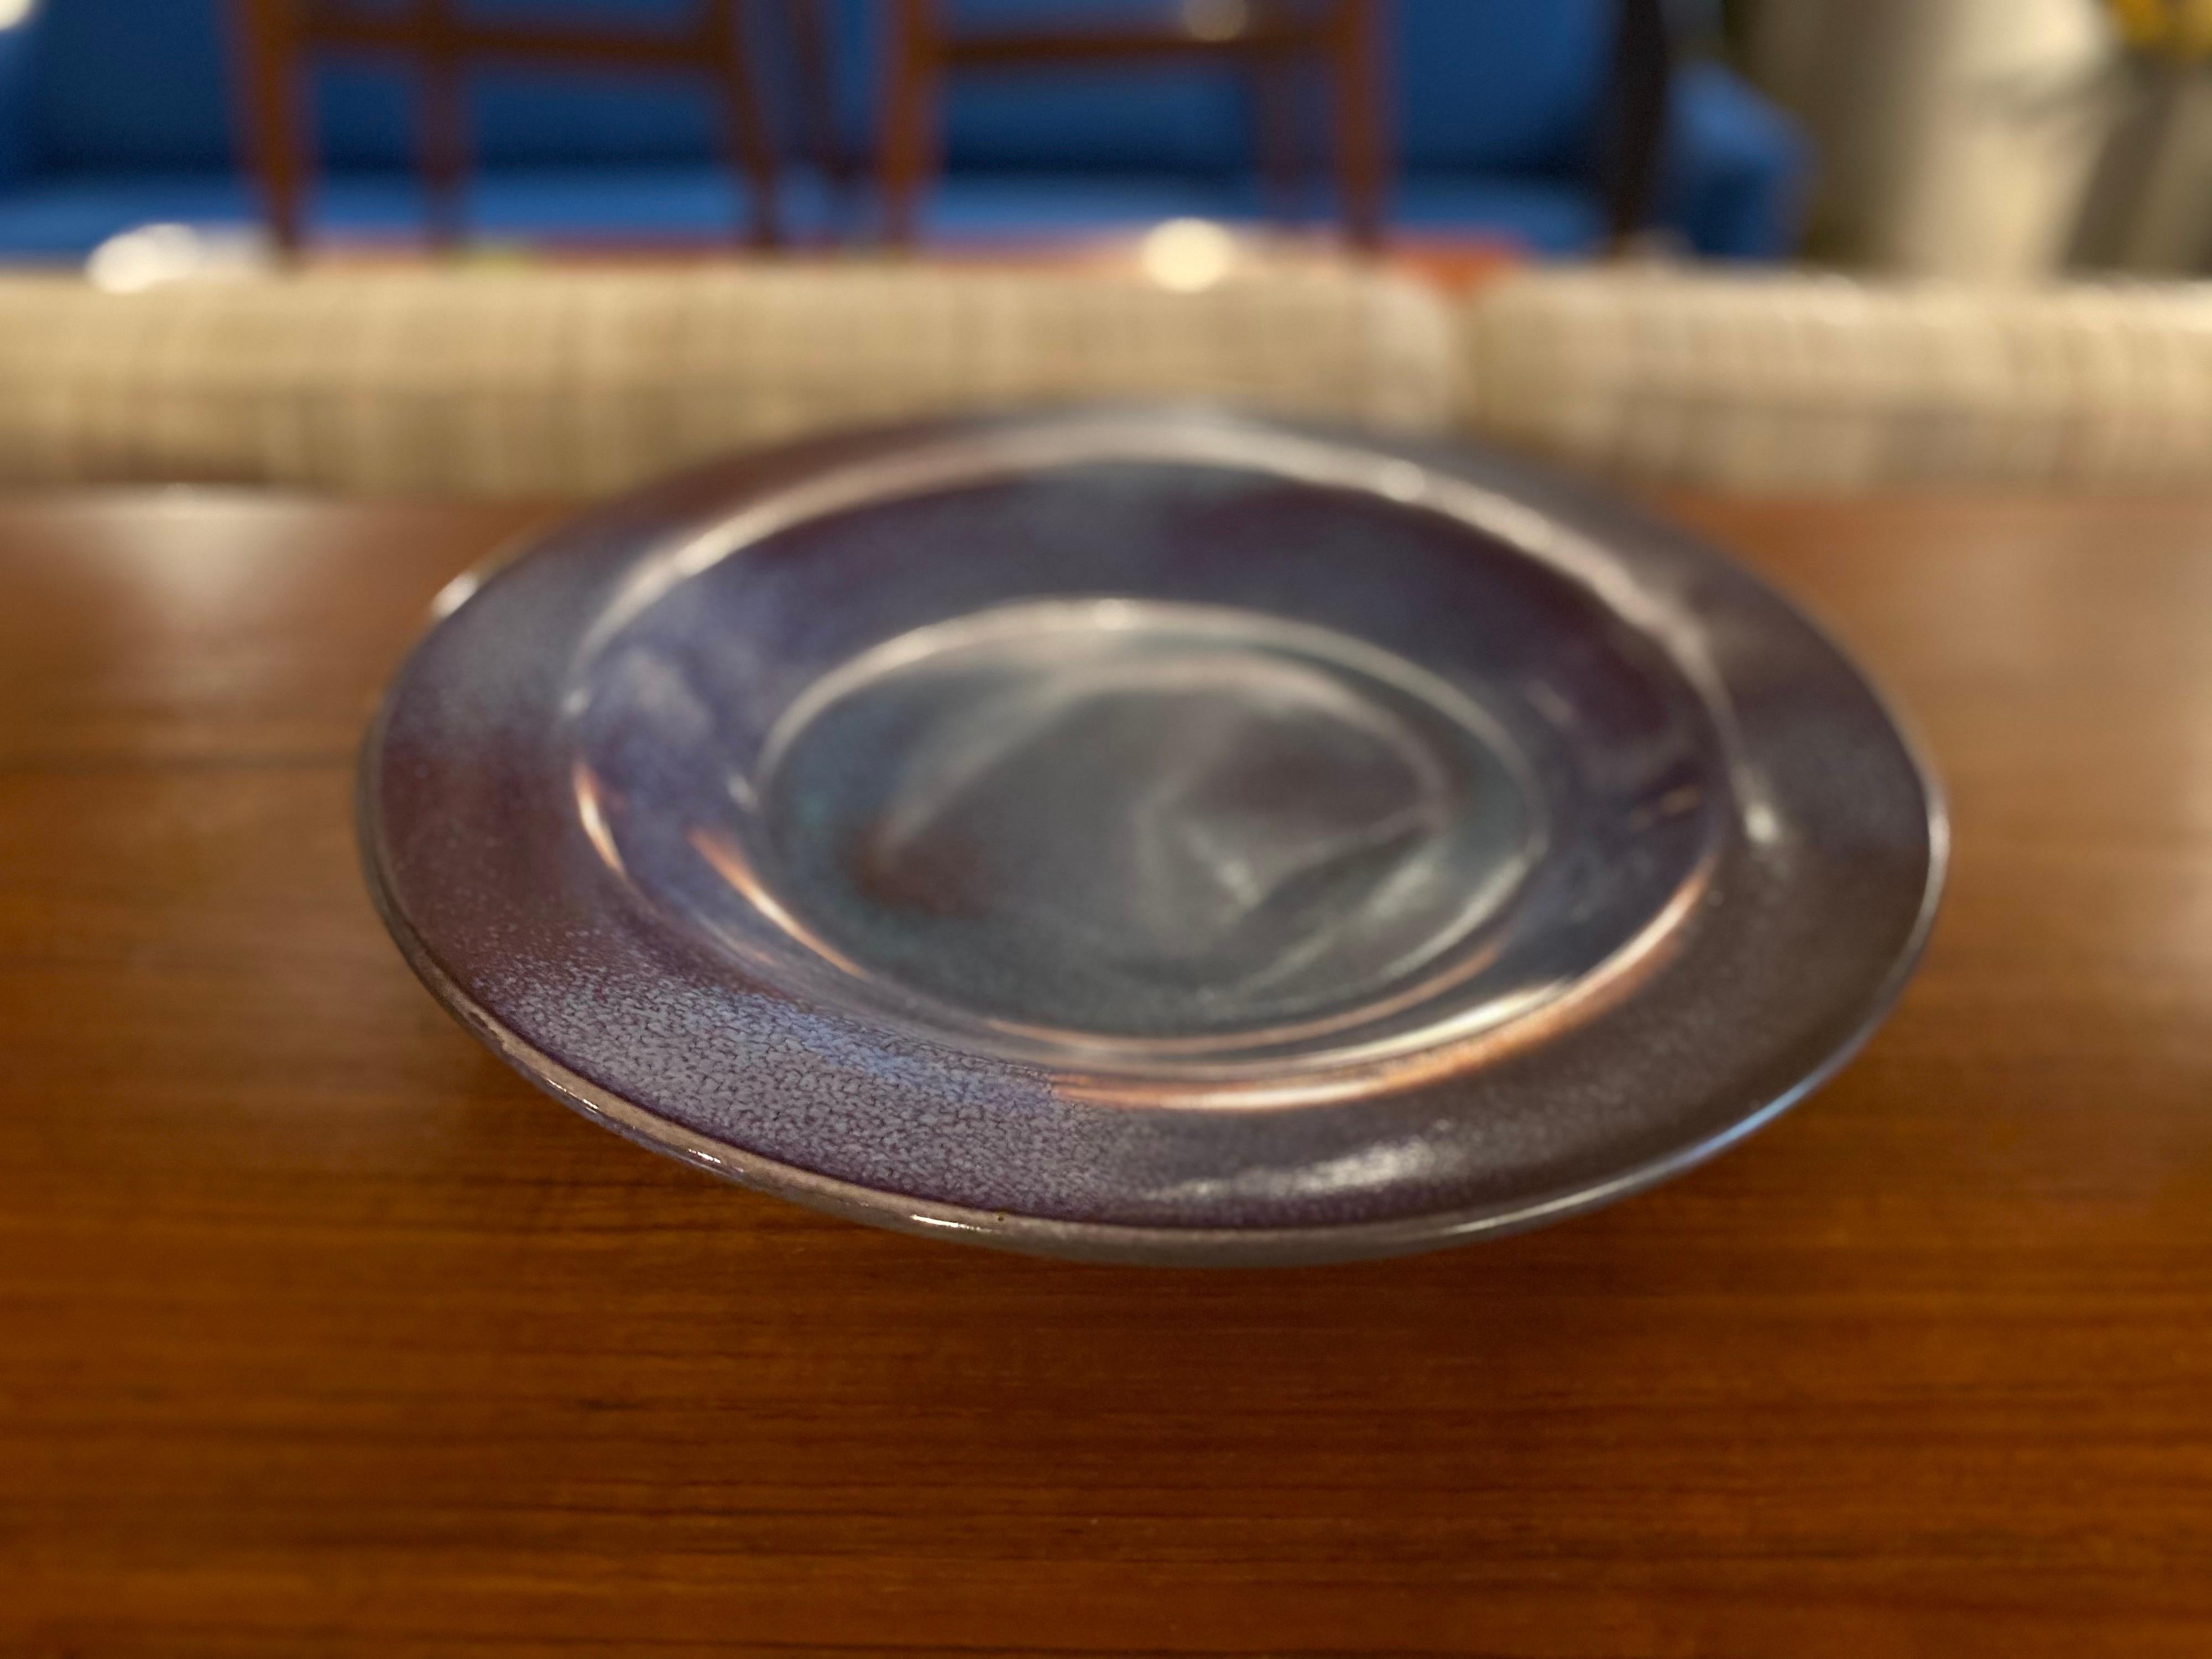 Stunning vintage ceramic bowl made in 1957 by Texas Ceramist Harding Black. Very large decorative bowl features a beautiful glaze with purple and blue hues. This ceramic glazed bowl is in great condition.